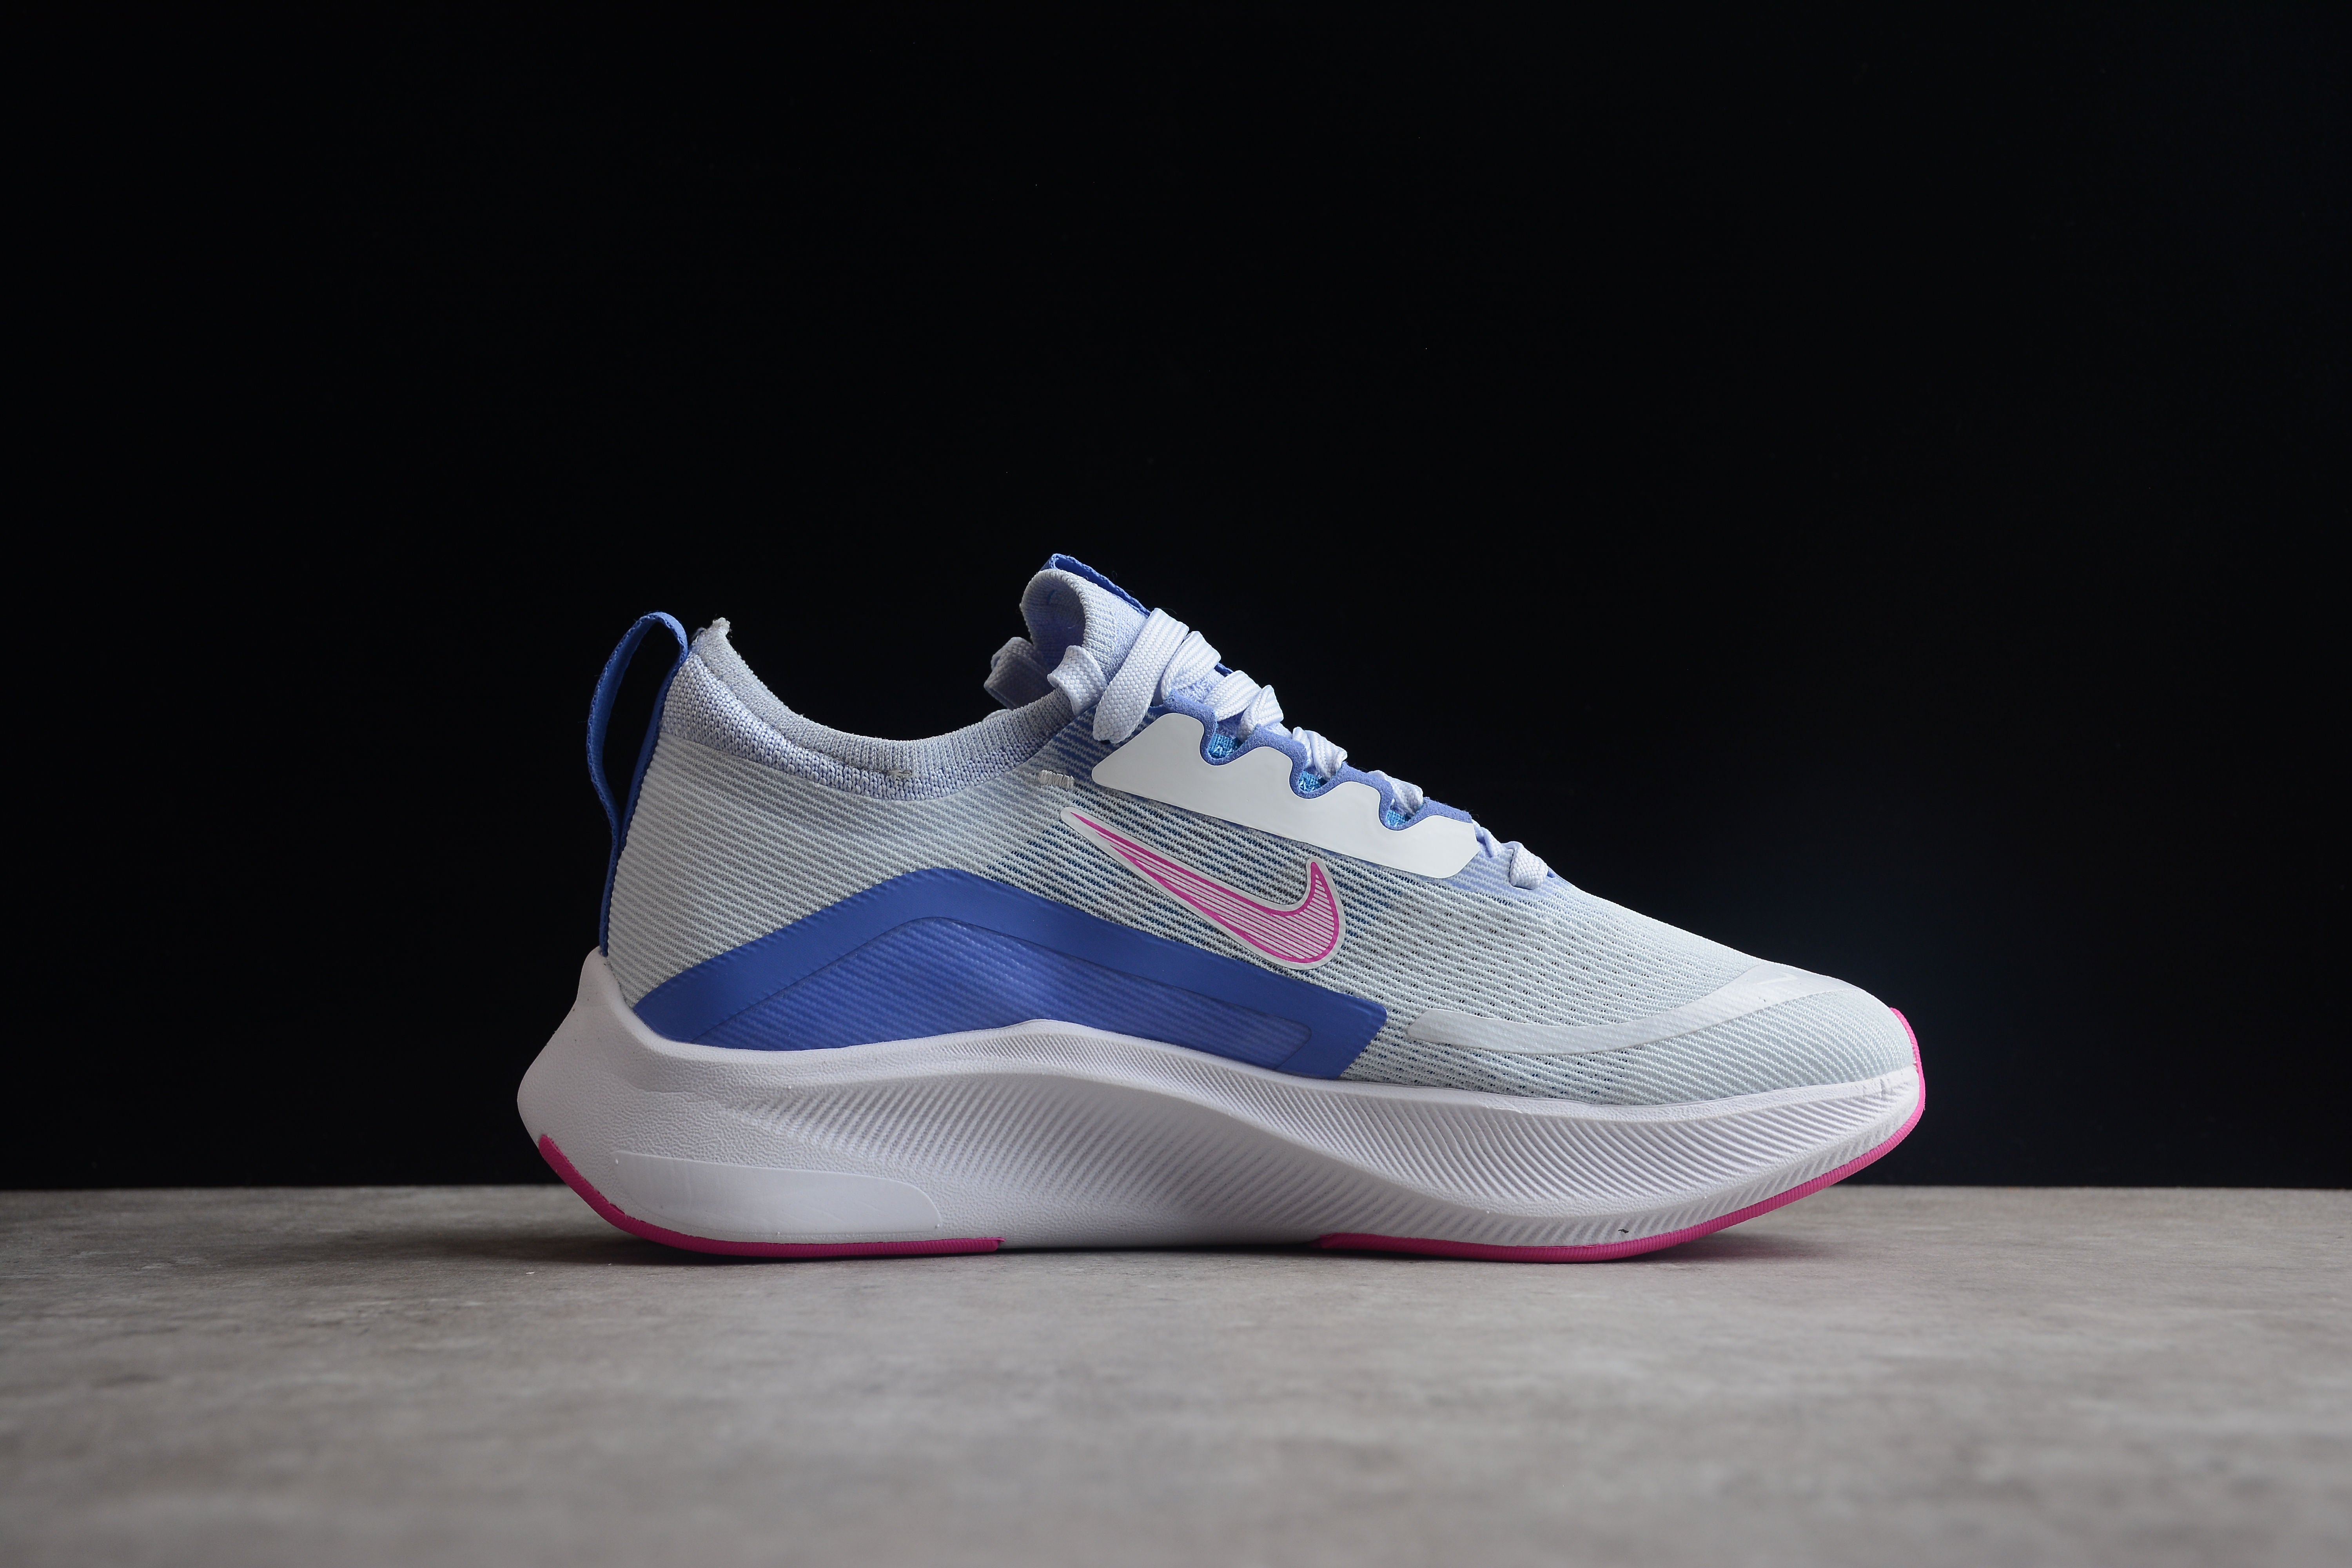 NK zoom Fly 4 blue pink